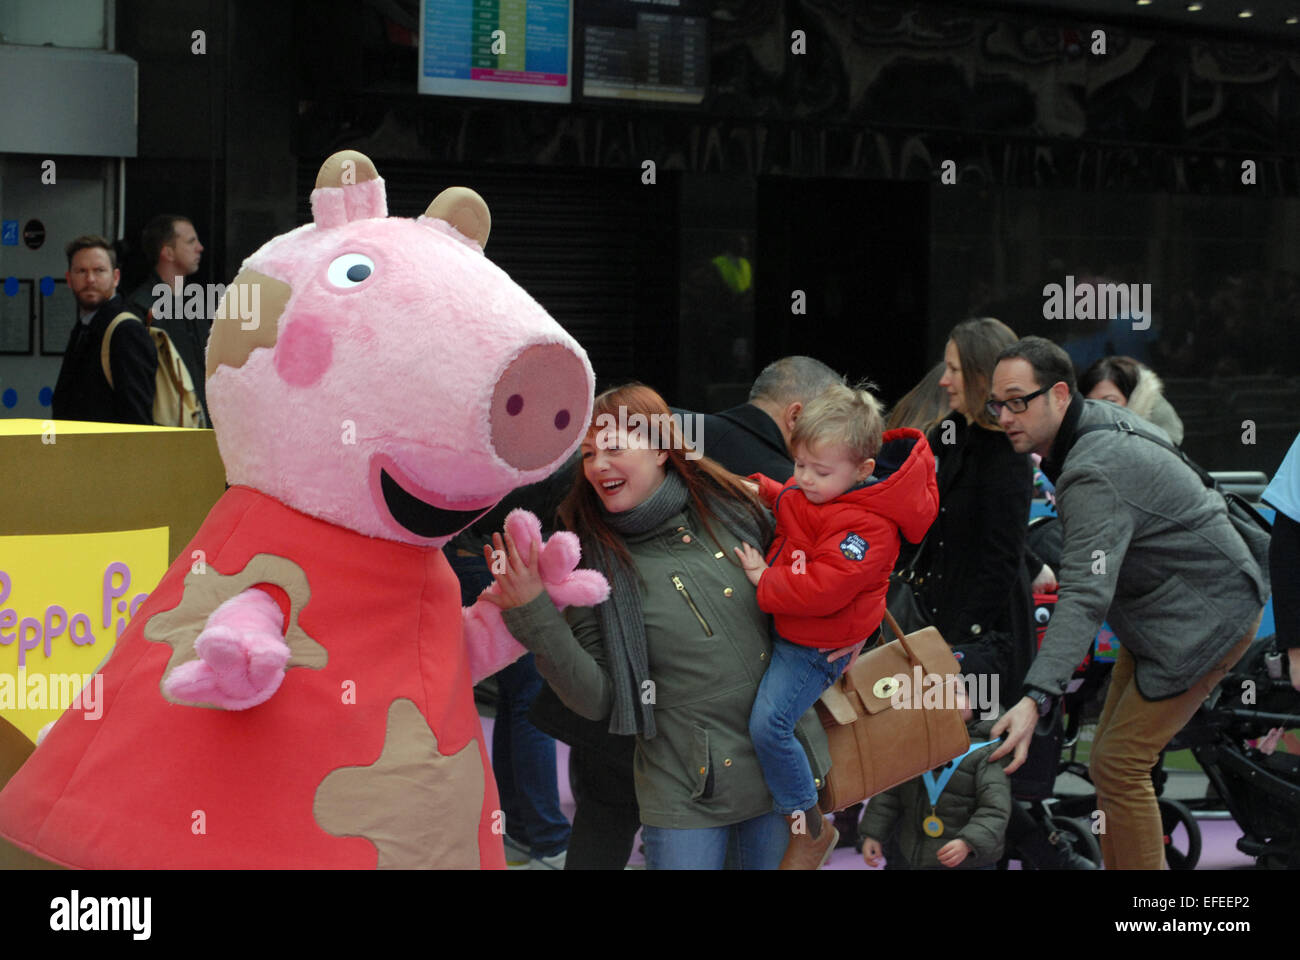 Peppa Pig Golden Boots Uk High Resolution Stock Photography and Images -  Alamy